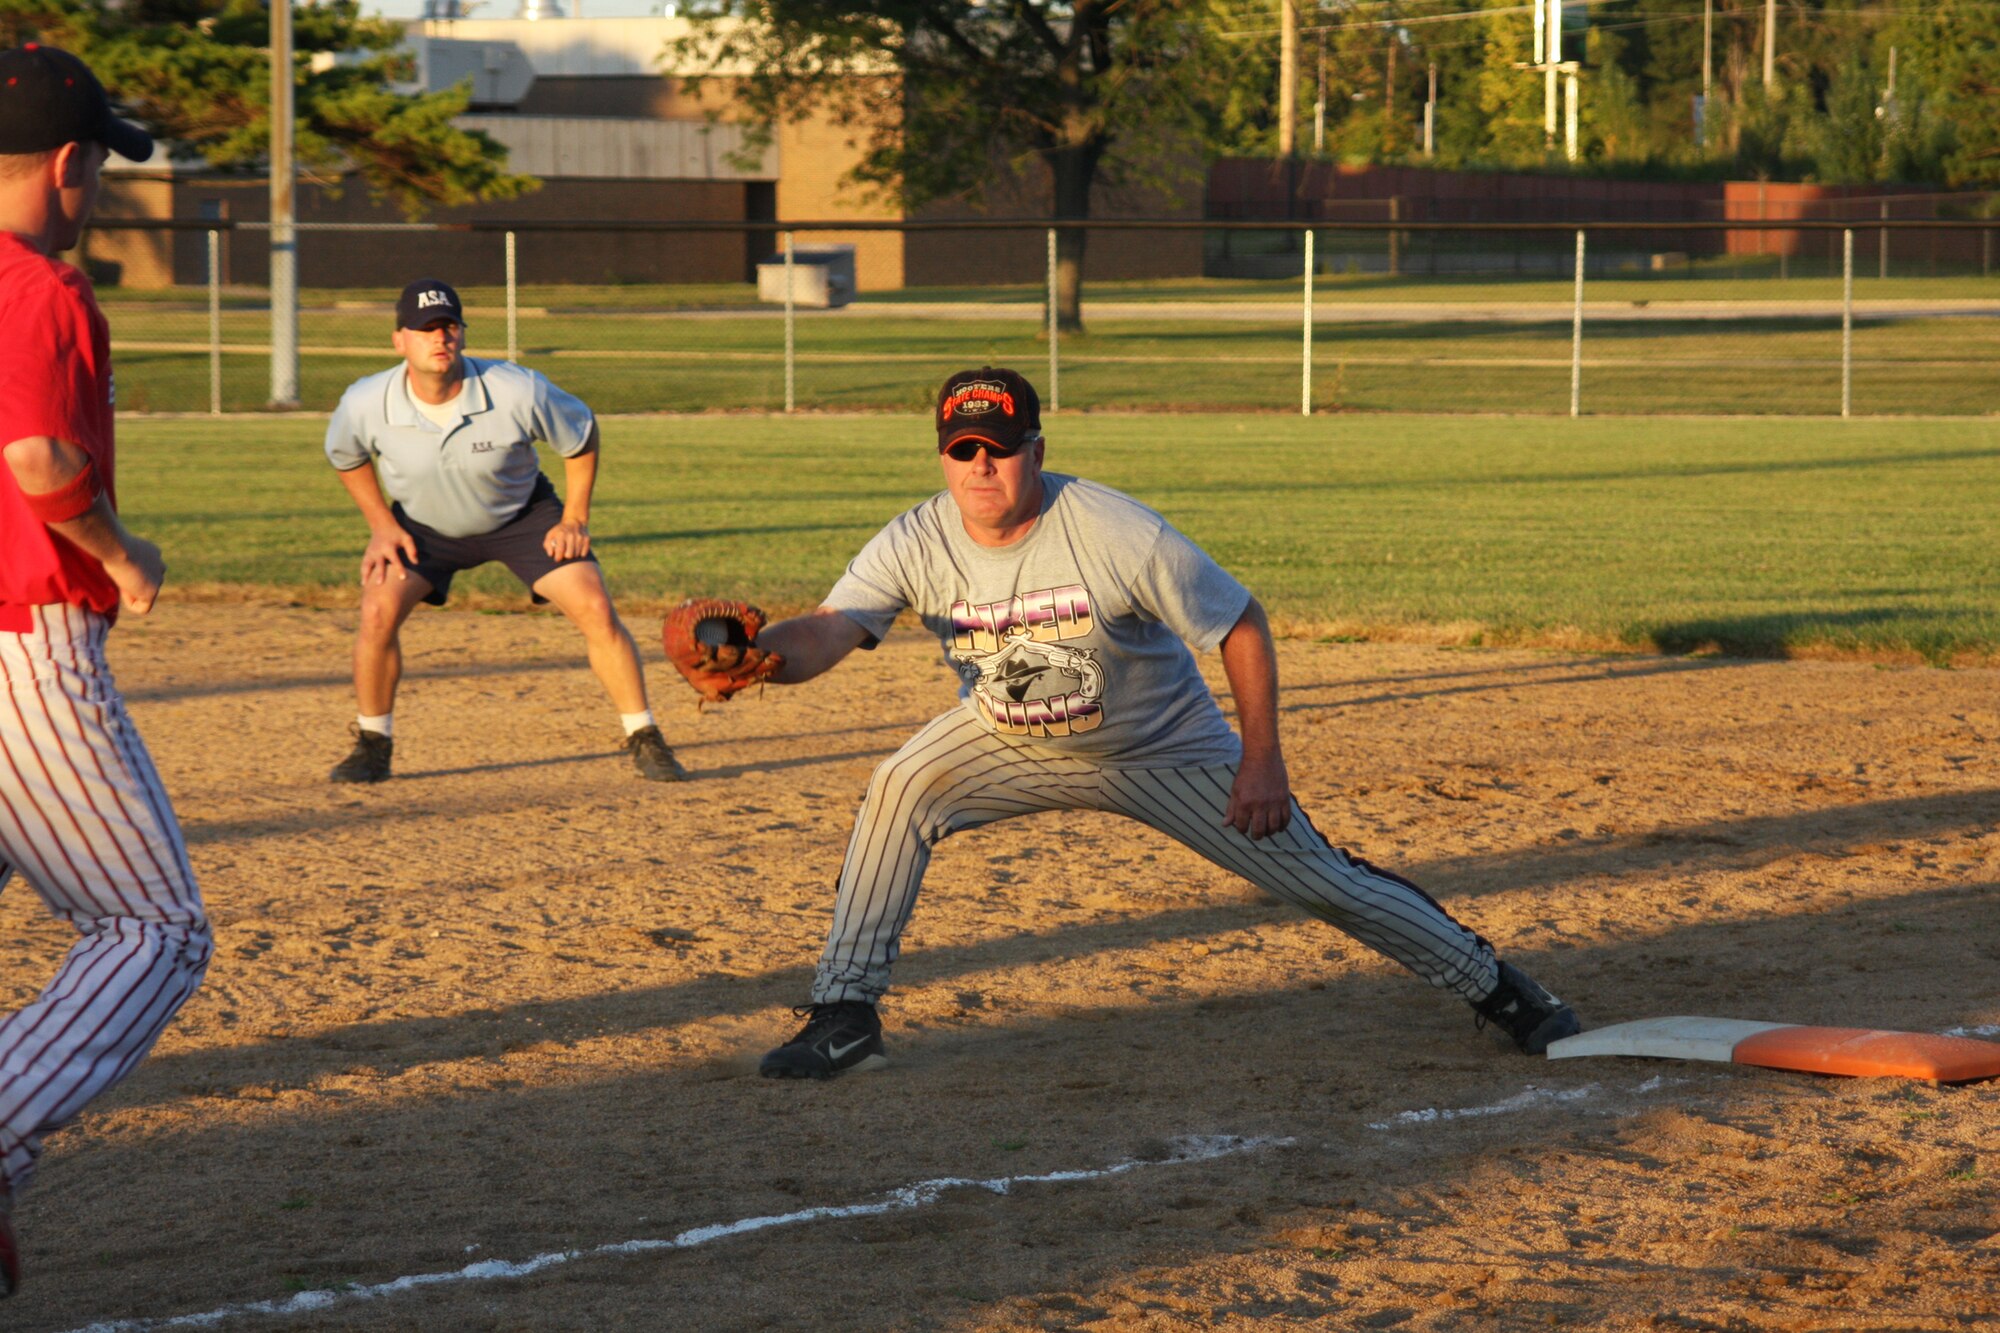 WRIGHT-PATTERSON AFB, Ohio - Tech. Sgt. Mike Ferguson, 445th Maintenance Squadron, catches a ball at first base during the second annual Wright-Patterson Air Force Base Active Duty vs. Reserve Softball Challenge Sep. 12, 2009.  (Air Force photo/Tech. Sgt. Jeremy Caskey) 